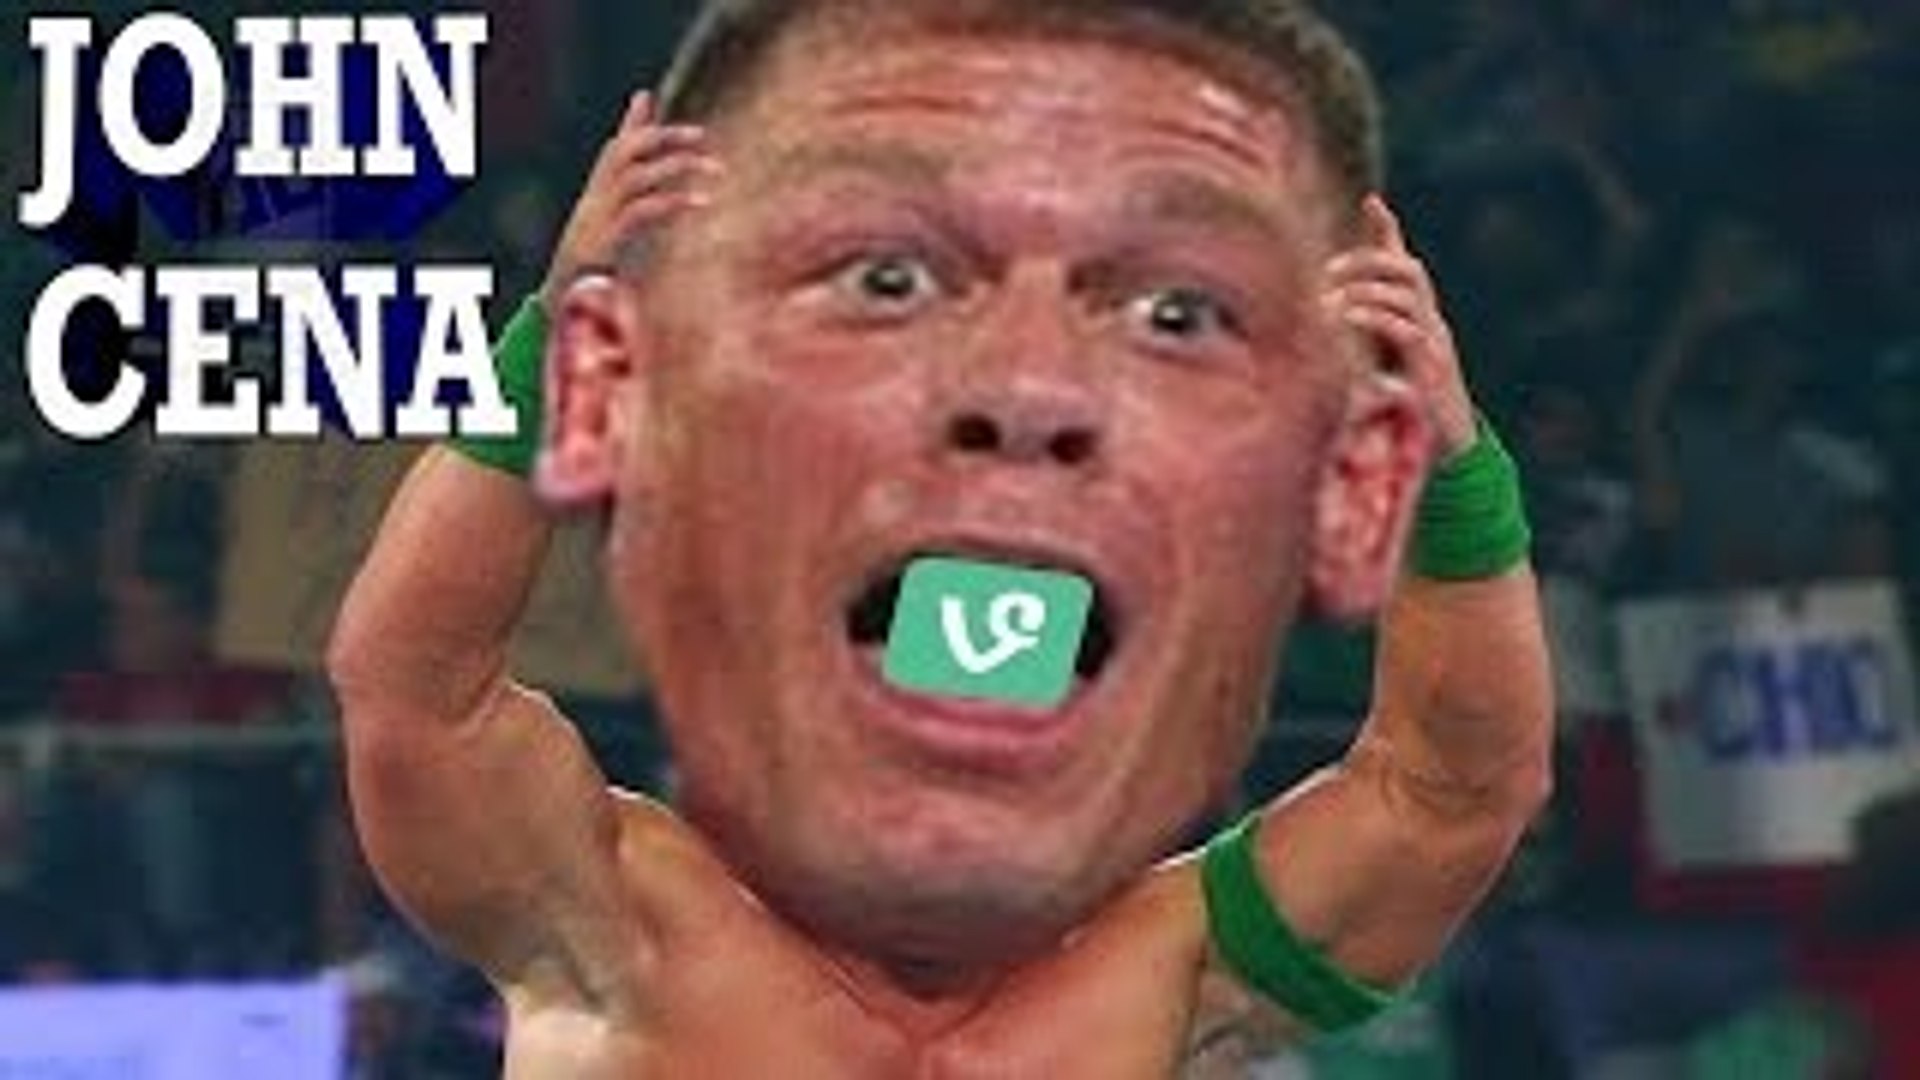 His Name Is John Cena Best Vines Compilation Dailymotion Video